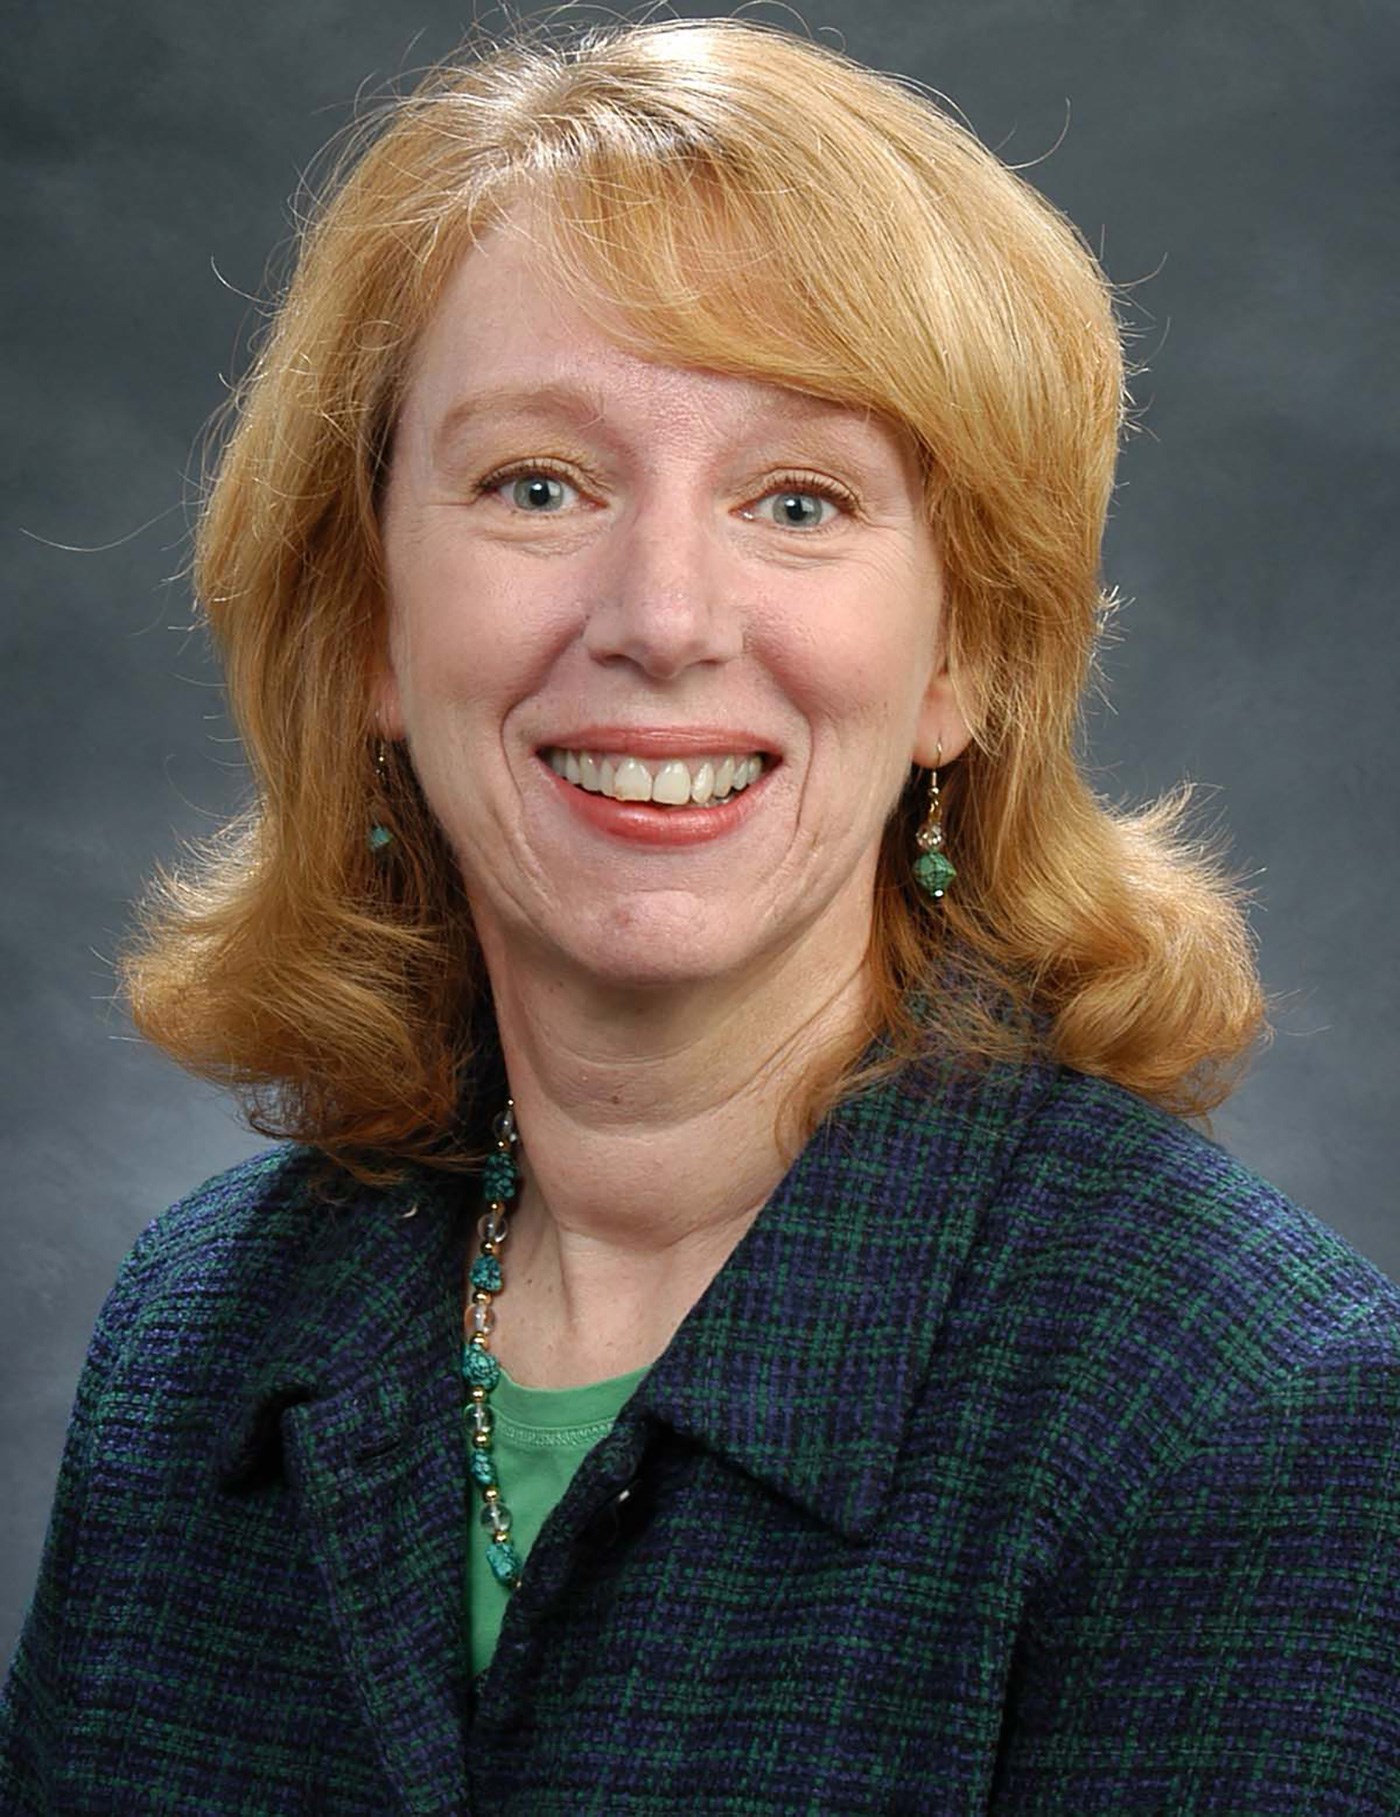 Christine Robbins is the Senior Assistant Director of Financial Aid at UMass Lowell.